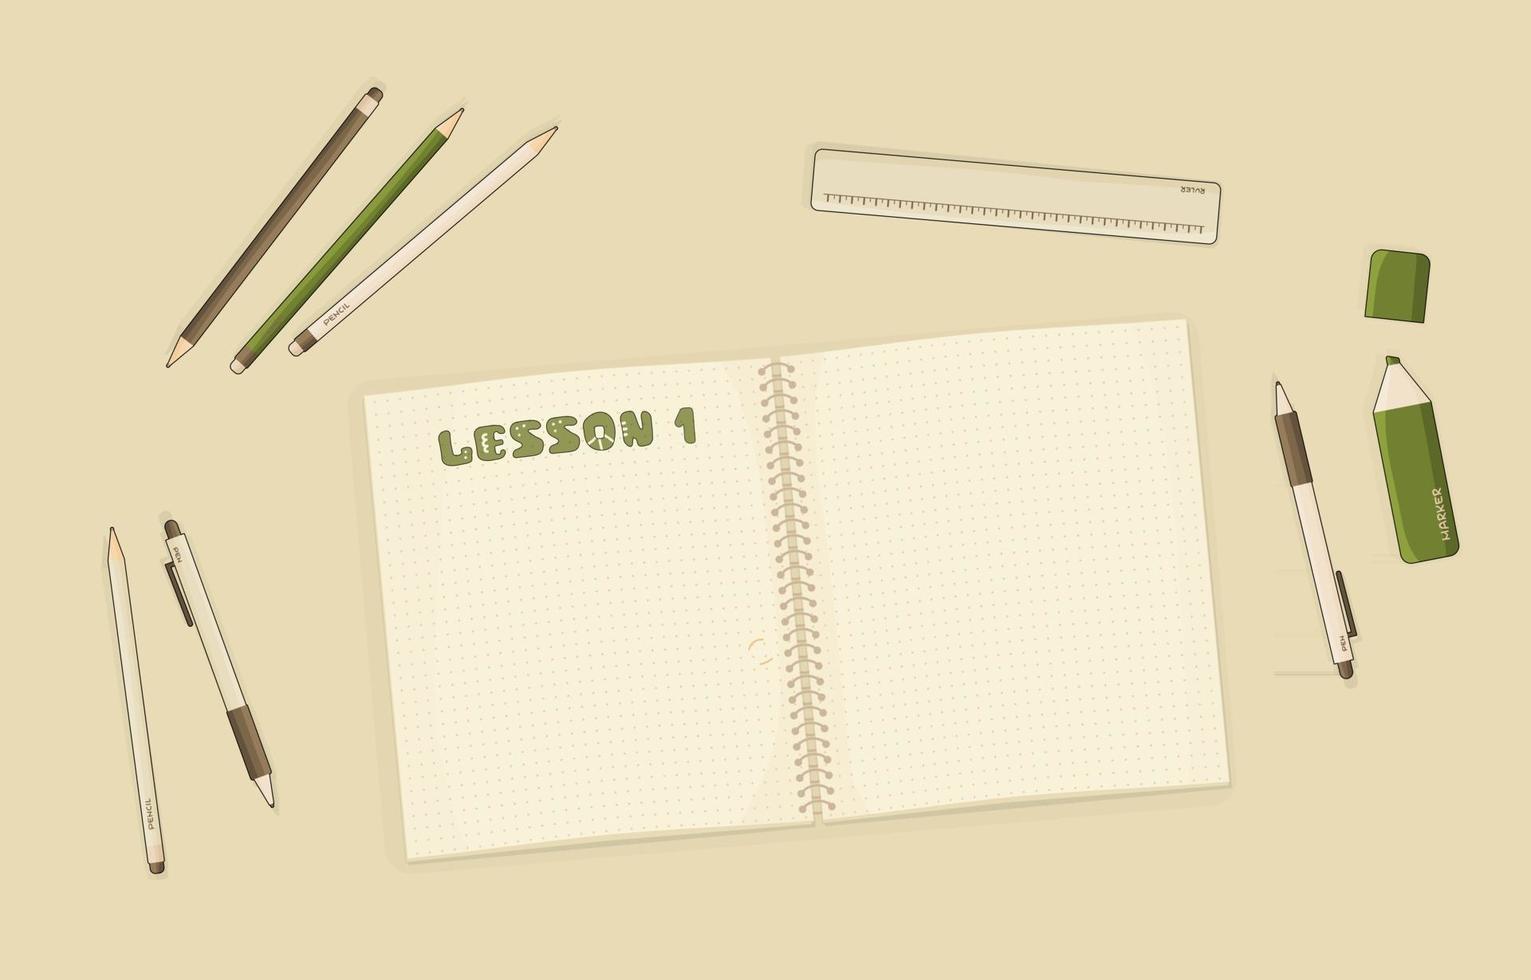 Vector outline Notebook or exercise book with dots for summary notes for mockup or start of some hobby, education, pen, pencil, marker, ruler are on the table in room.  Lesson number one is written